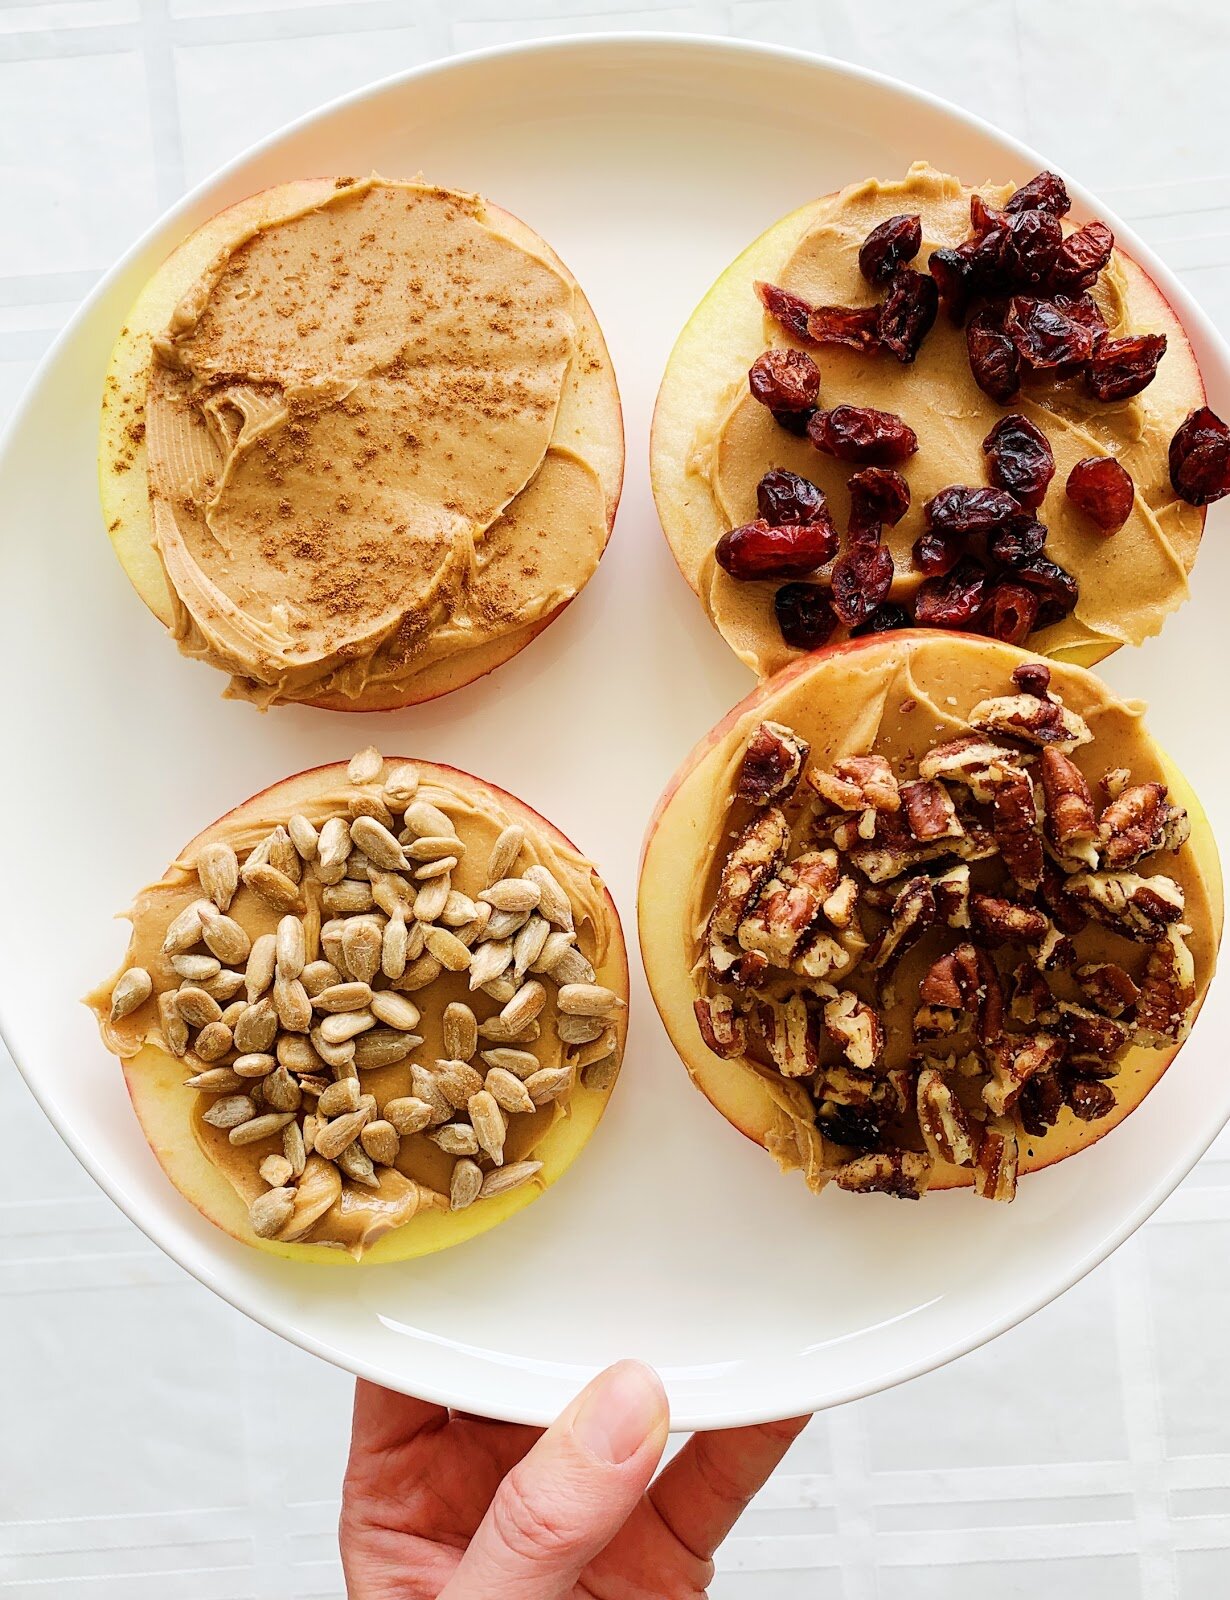 10 Easy Healthy Breakfasts For College Students